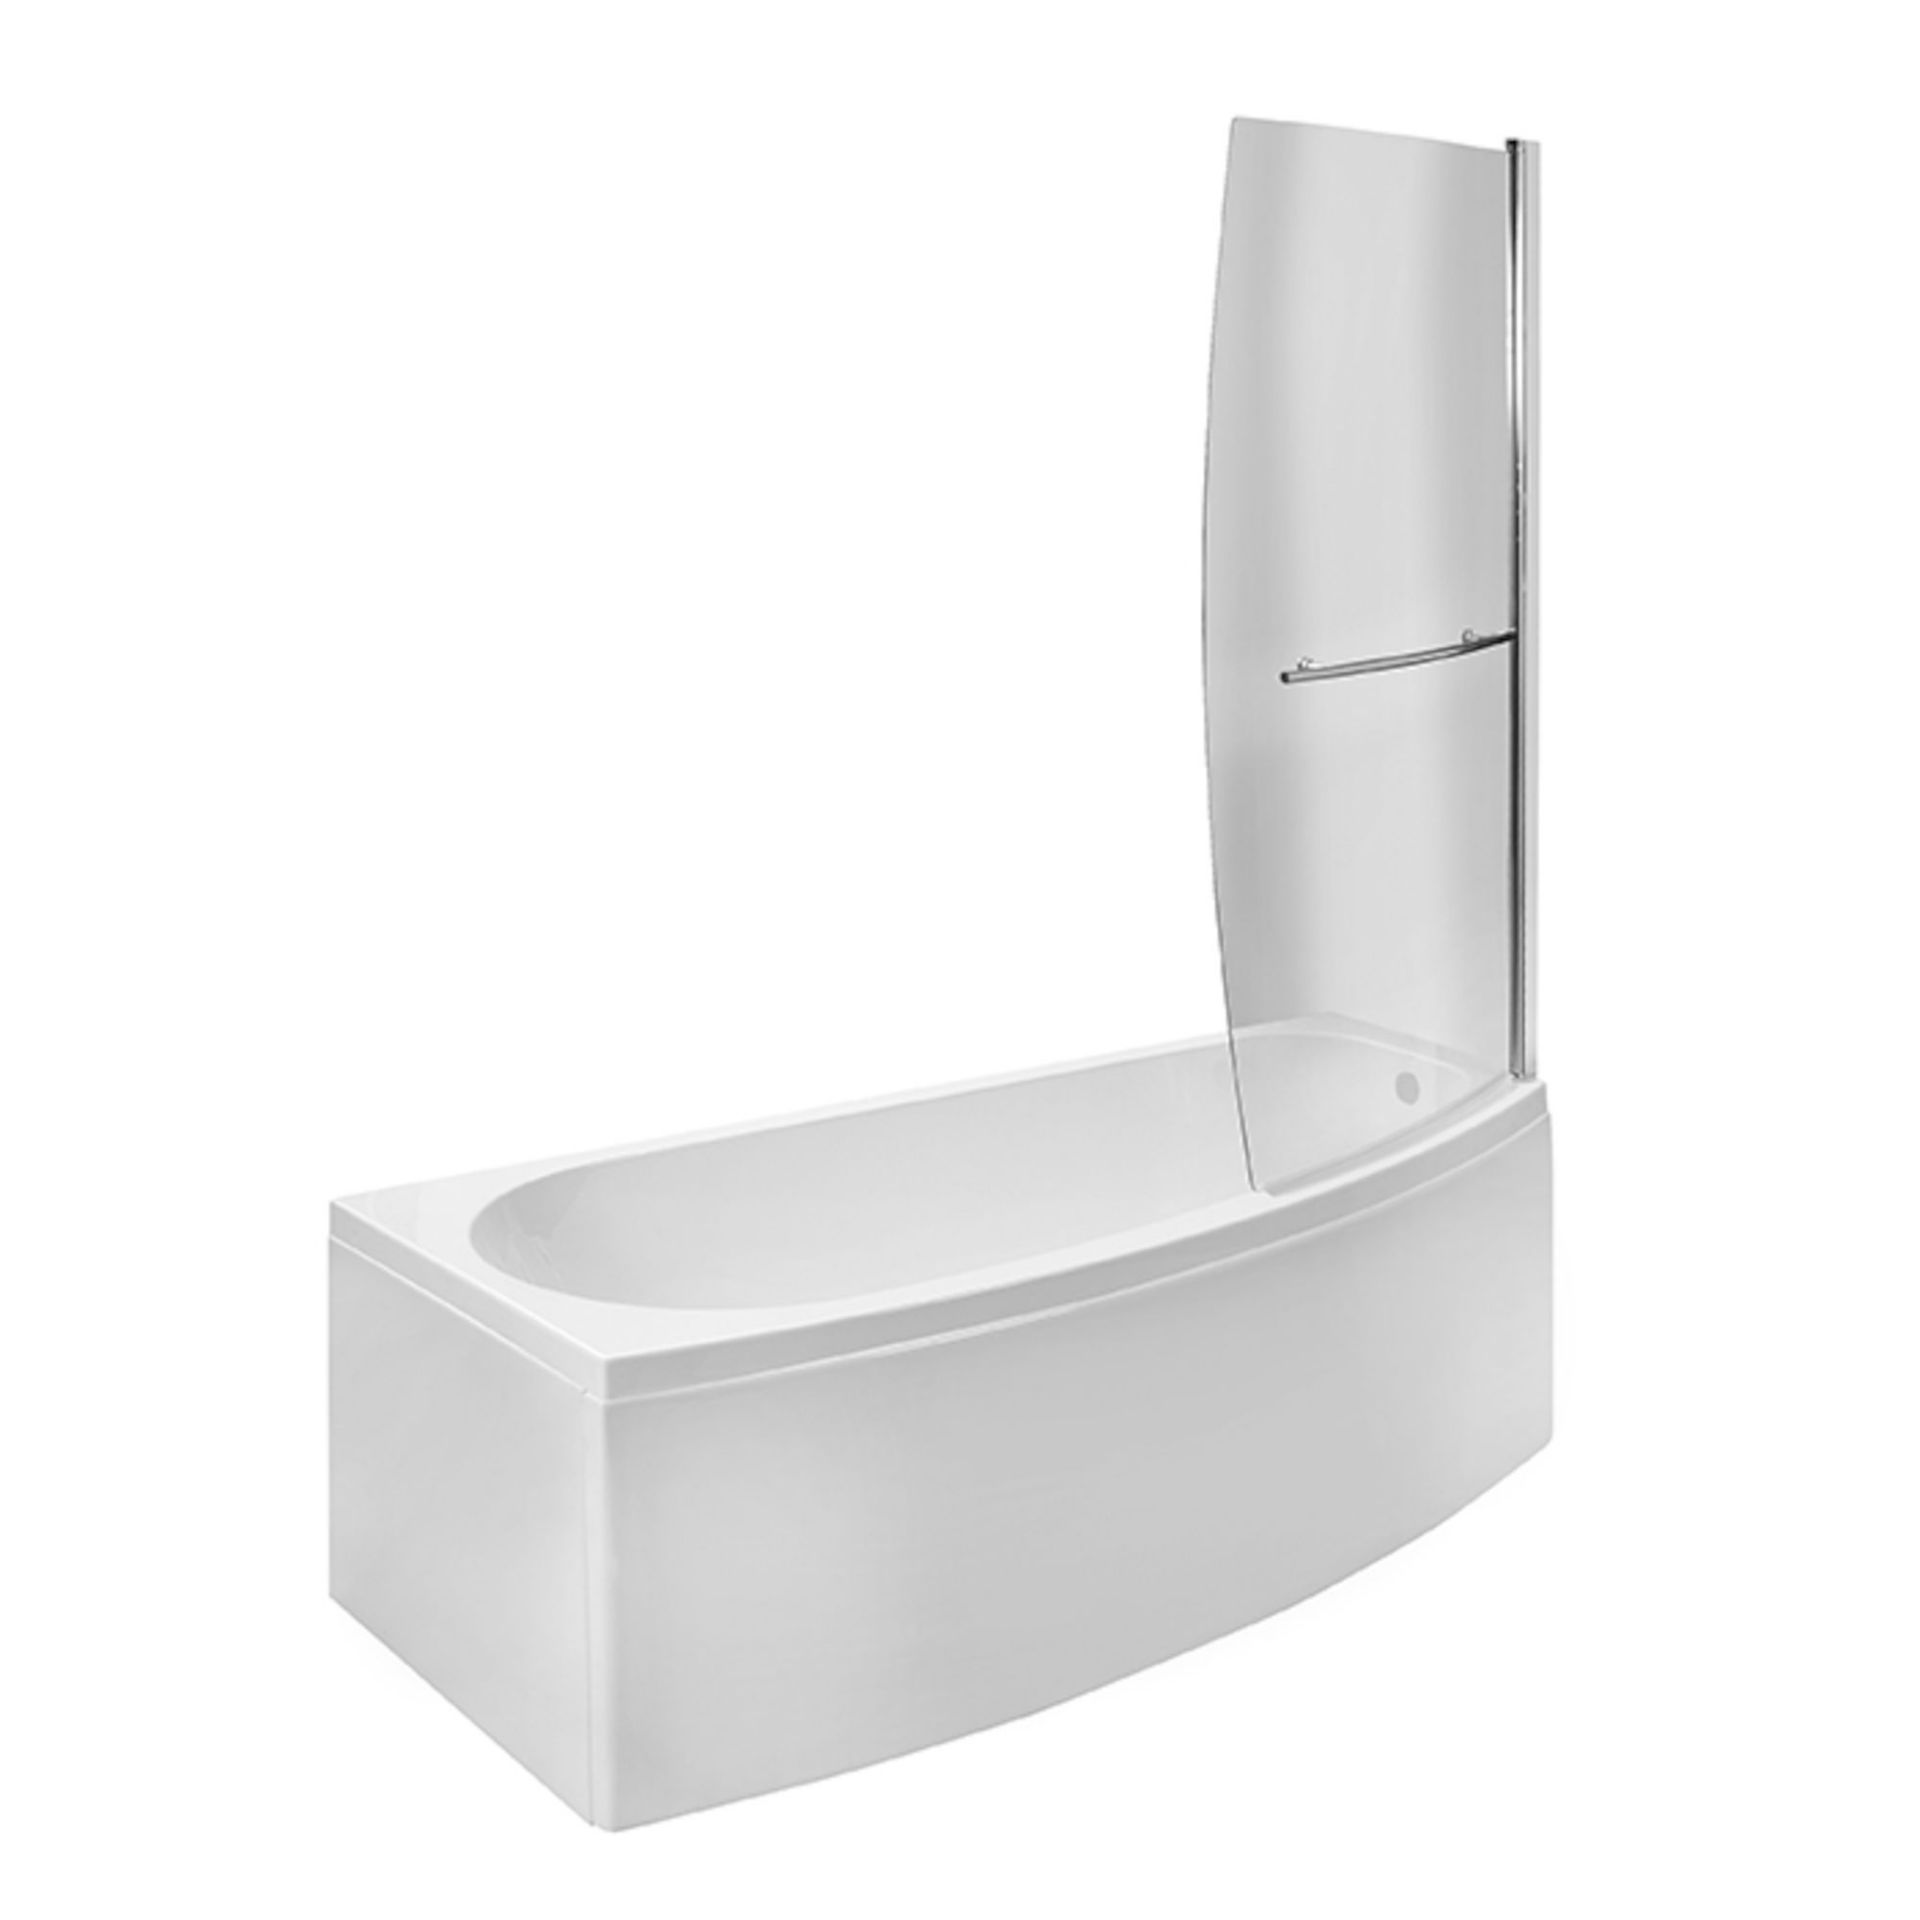 (KL193) 1700mm Right Hand Space Saver Shower Bath Screen Rail & Front Panel (Excludes End Panel). - Image 2 of 3